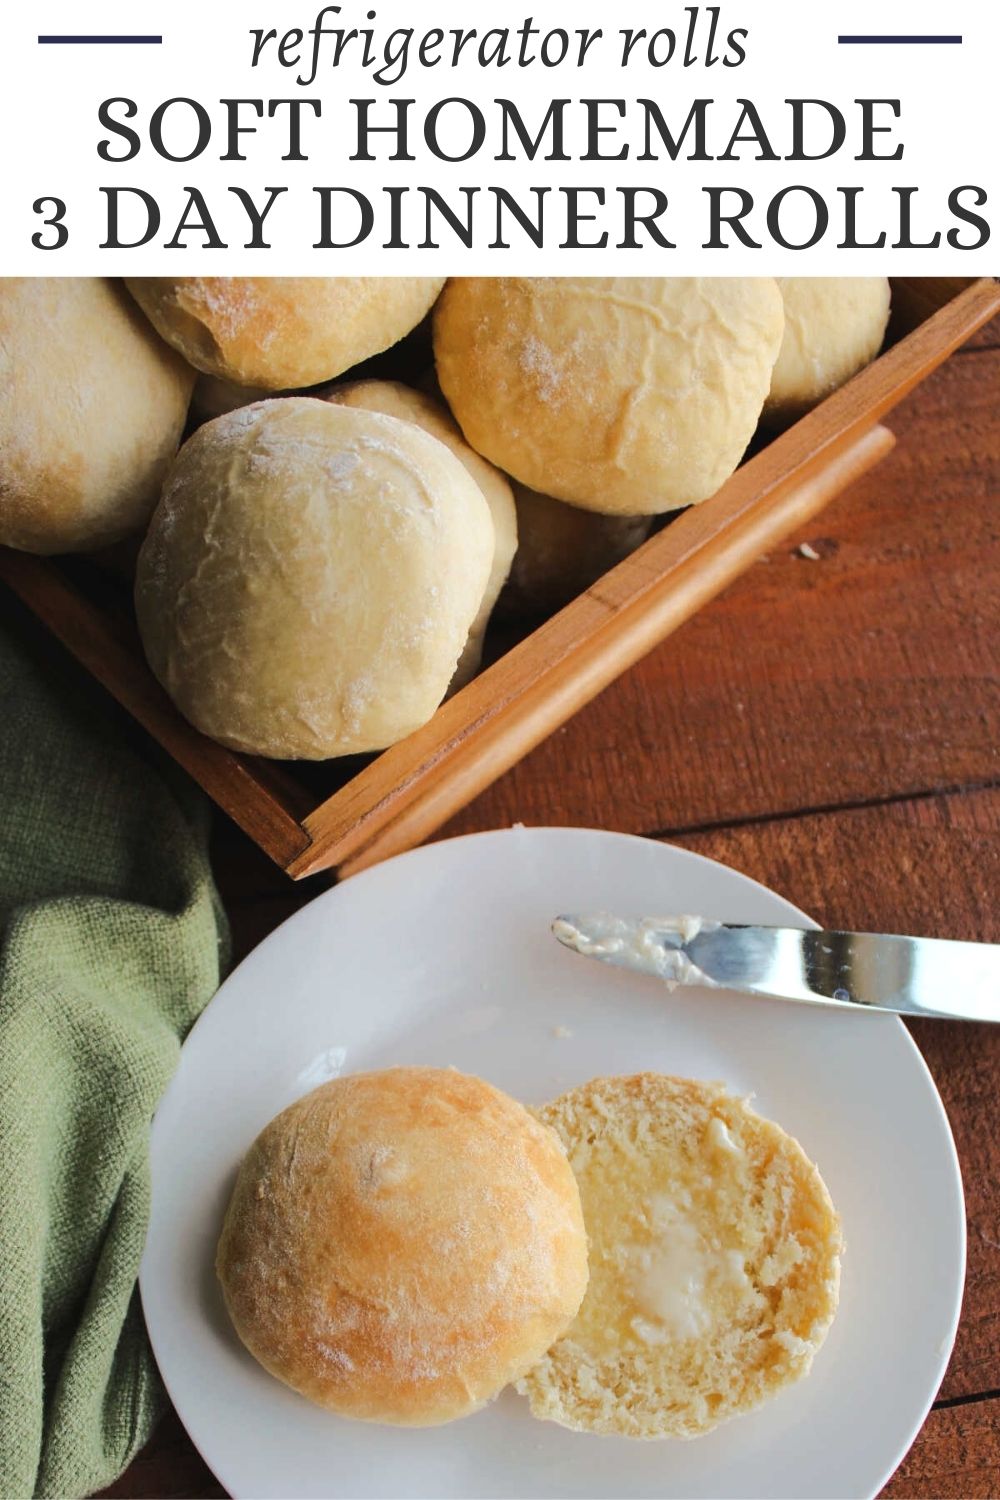 These rolls are so fluffy and soft. You can start the dough up to three days ahead of time, so they are perfect for your holiday table!